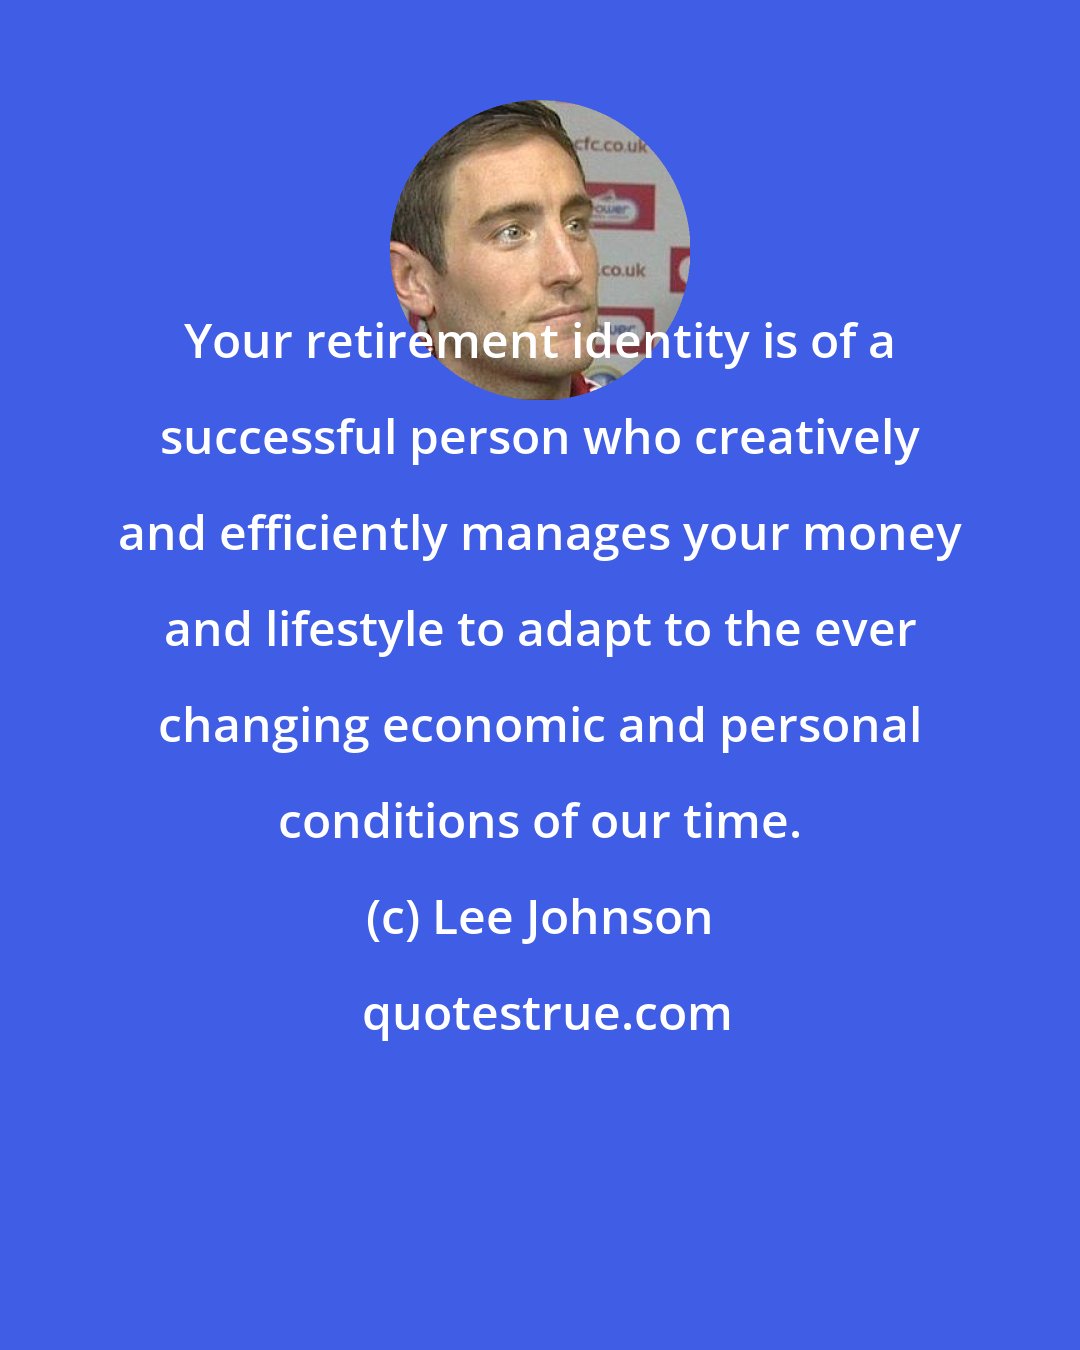 Lee Johnson: Your retirement identity is of a successful person who creatively and efficiently manages your money and lifestyle to adapt to the ever changing economic and personal conditions of our time.